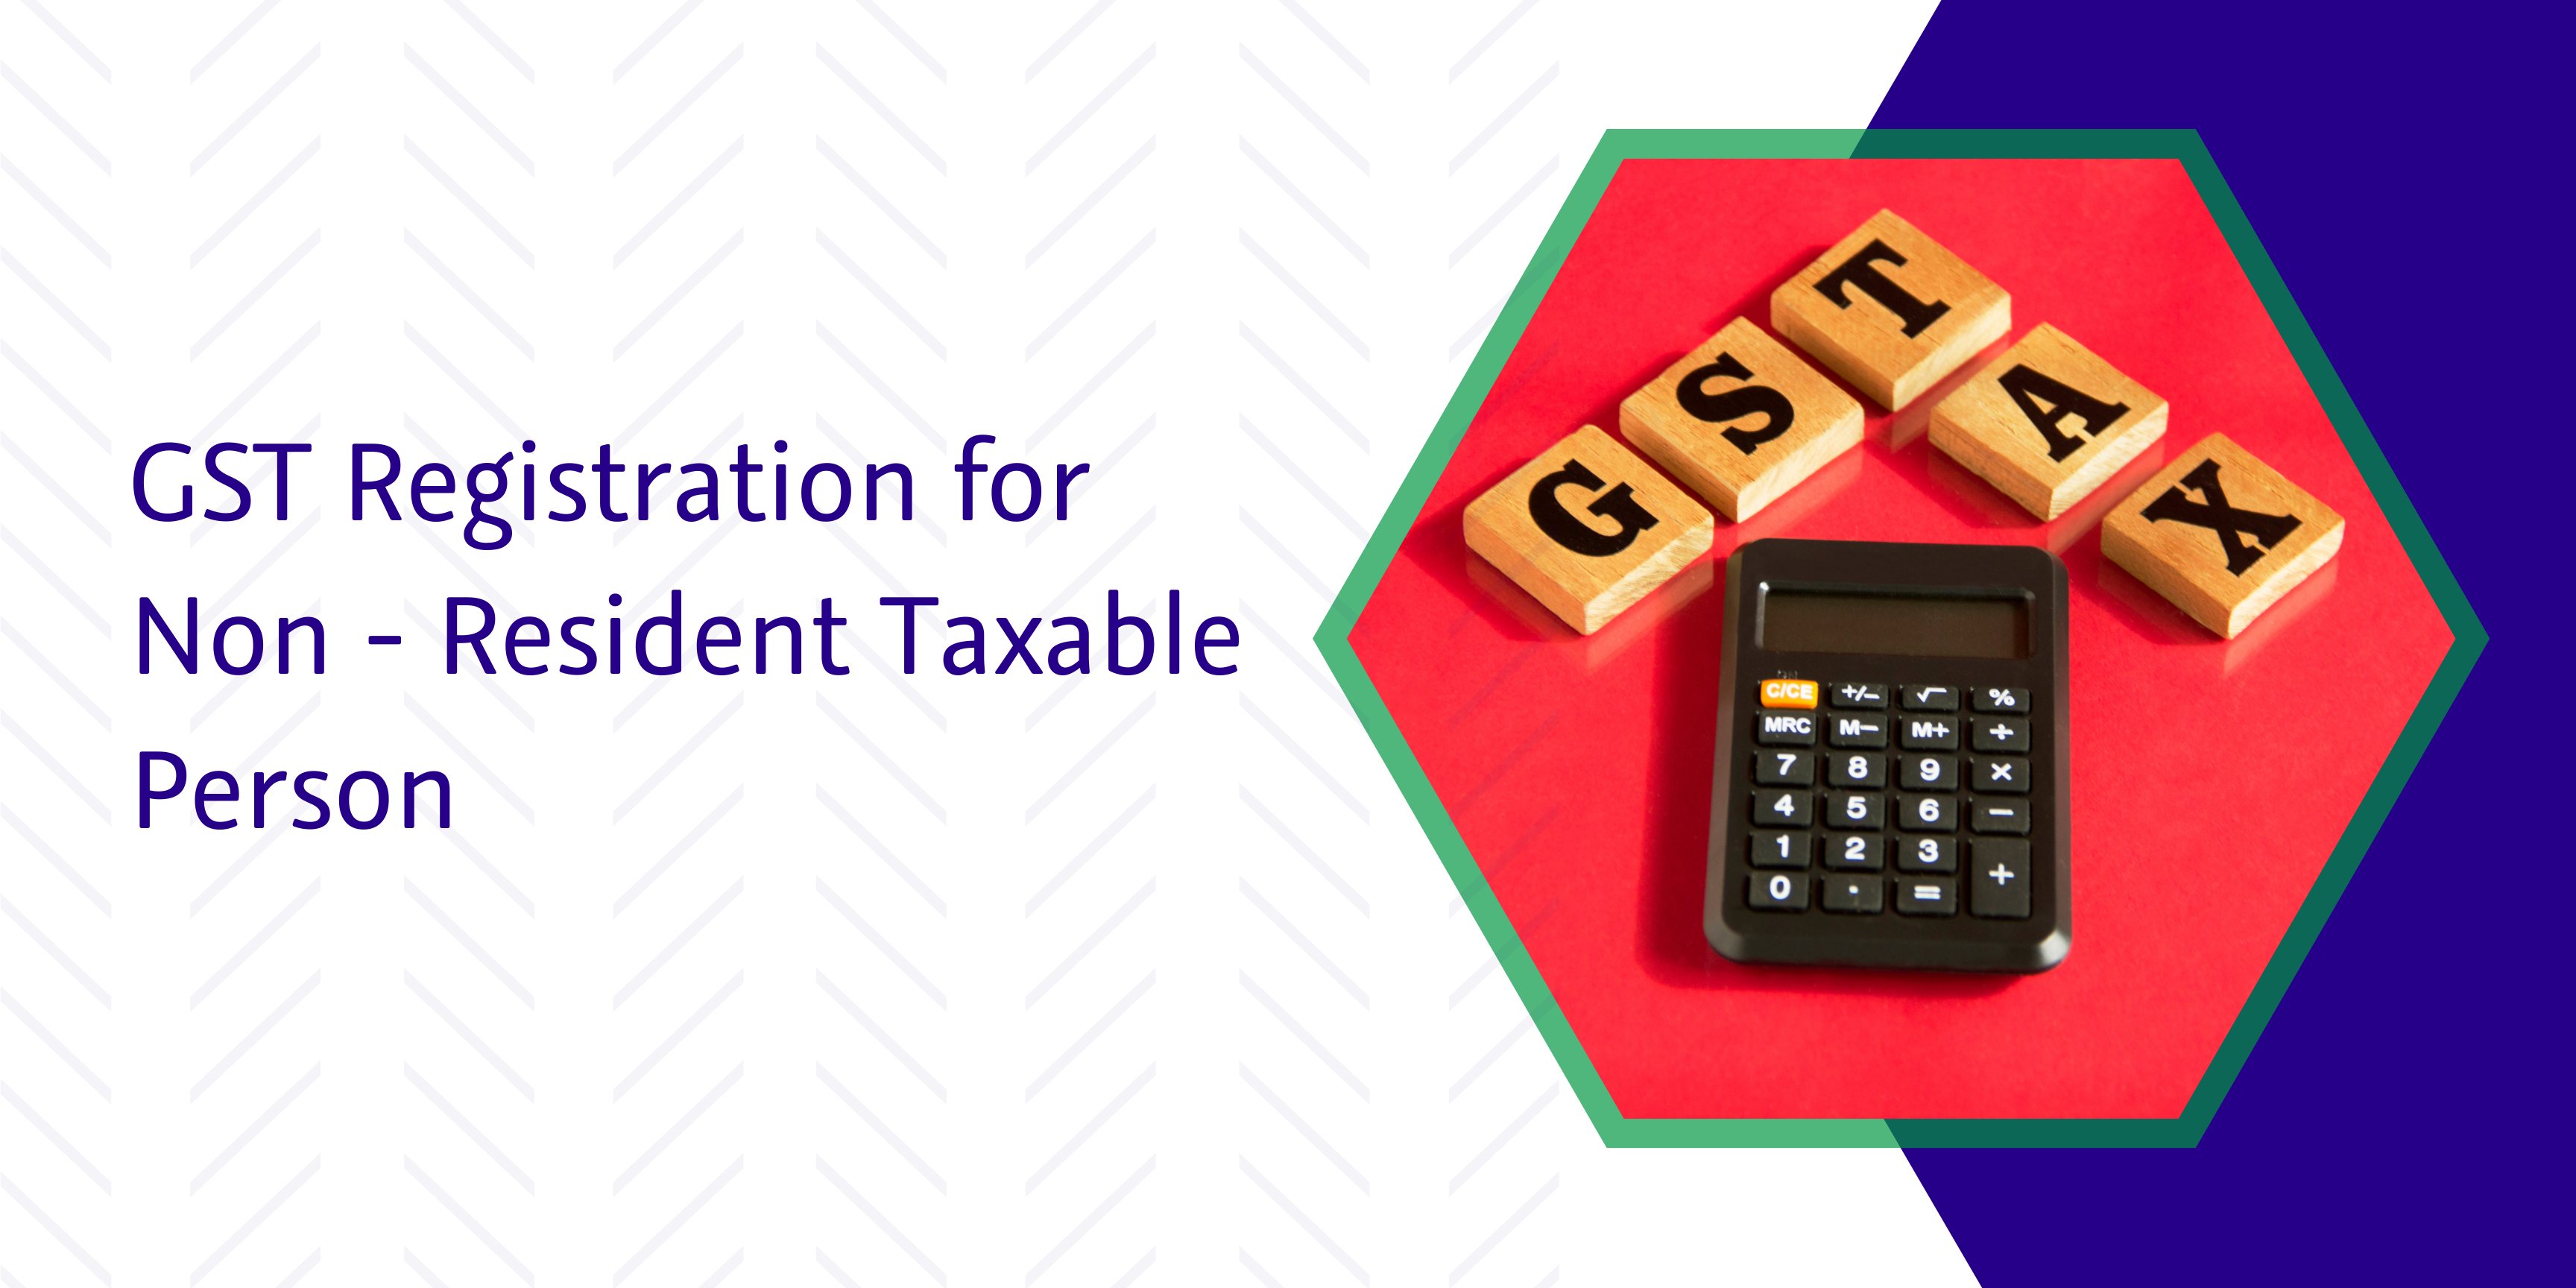 GST Registration for Non-Resident Taxable Person